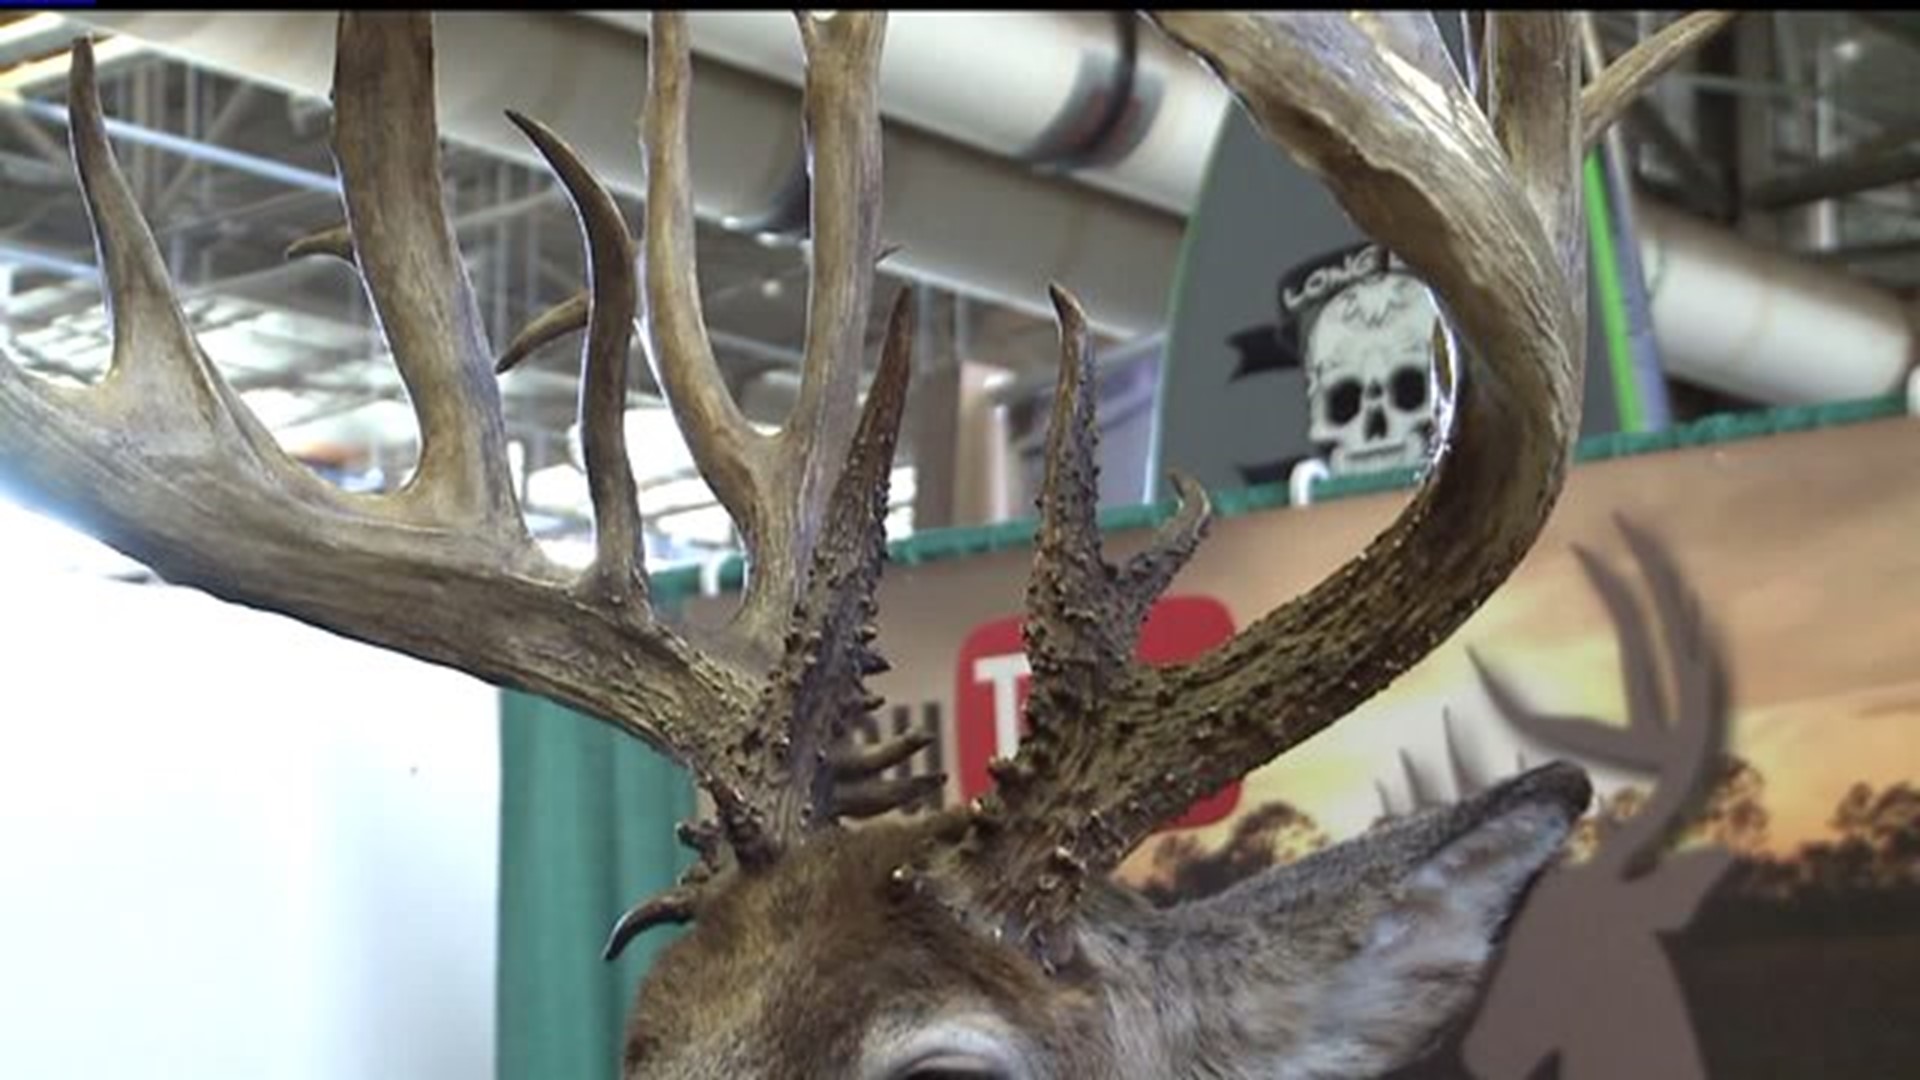 28-Point buck on display at Great American Outdoor Show